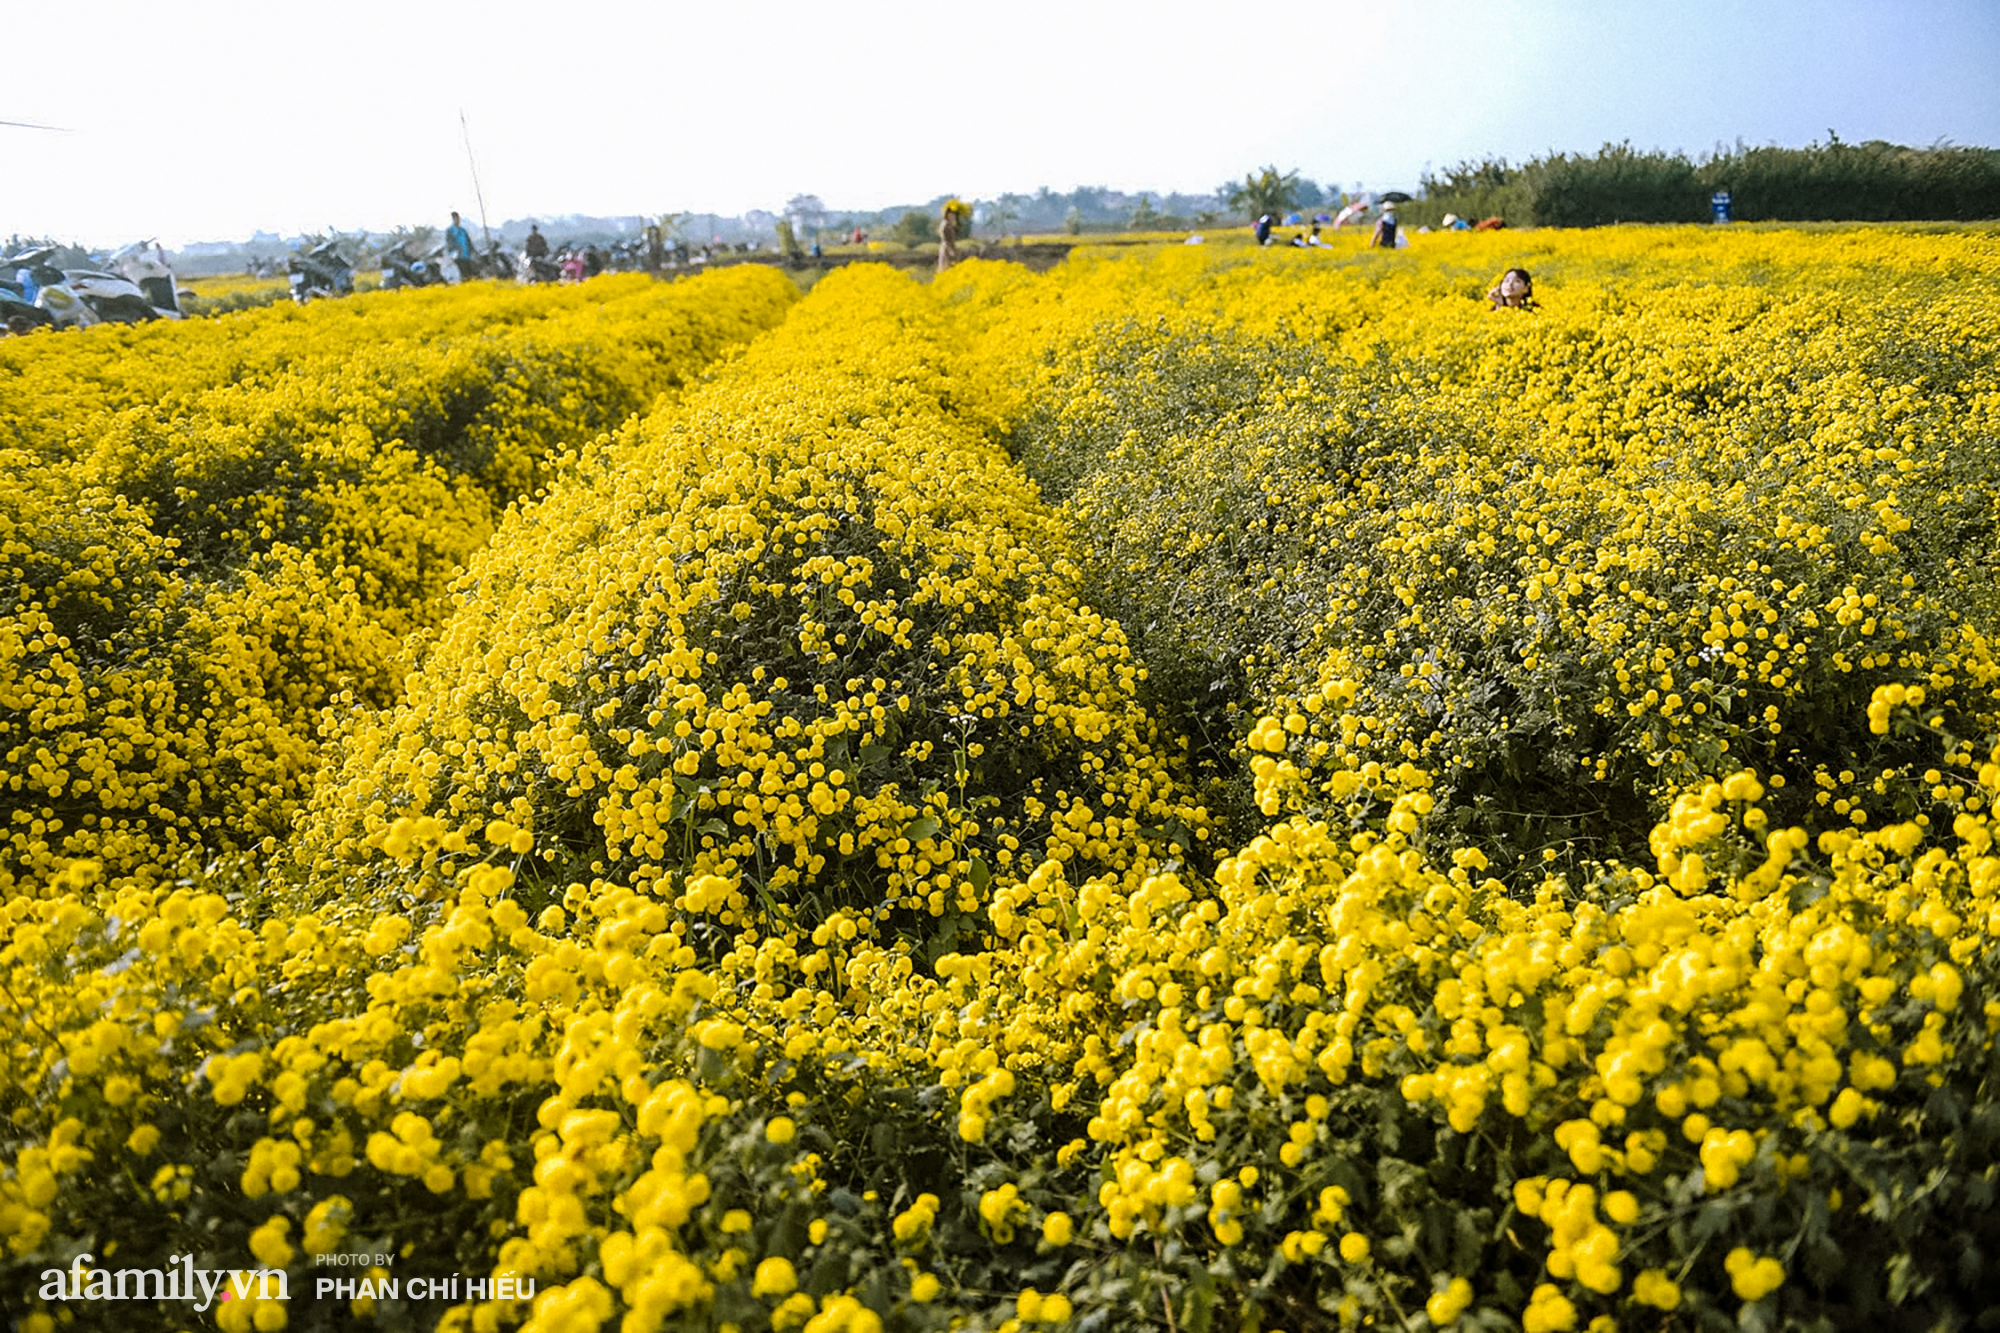 Visit a hundred-year village near Hanoi, possessing the "kingly" chrysanthemum fields  golden, making people everywhere pouring in to take pictures - Photo 15.